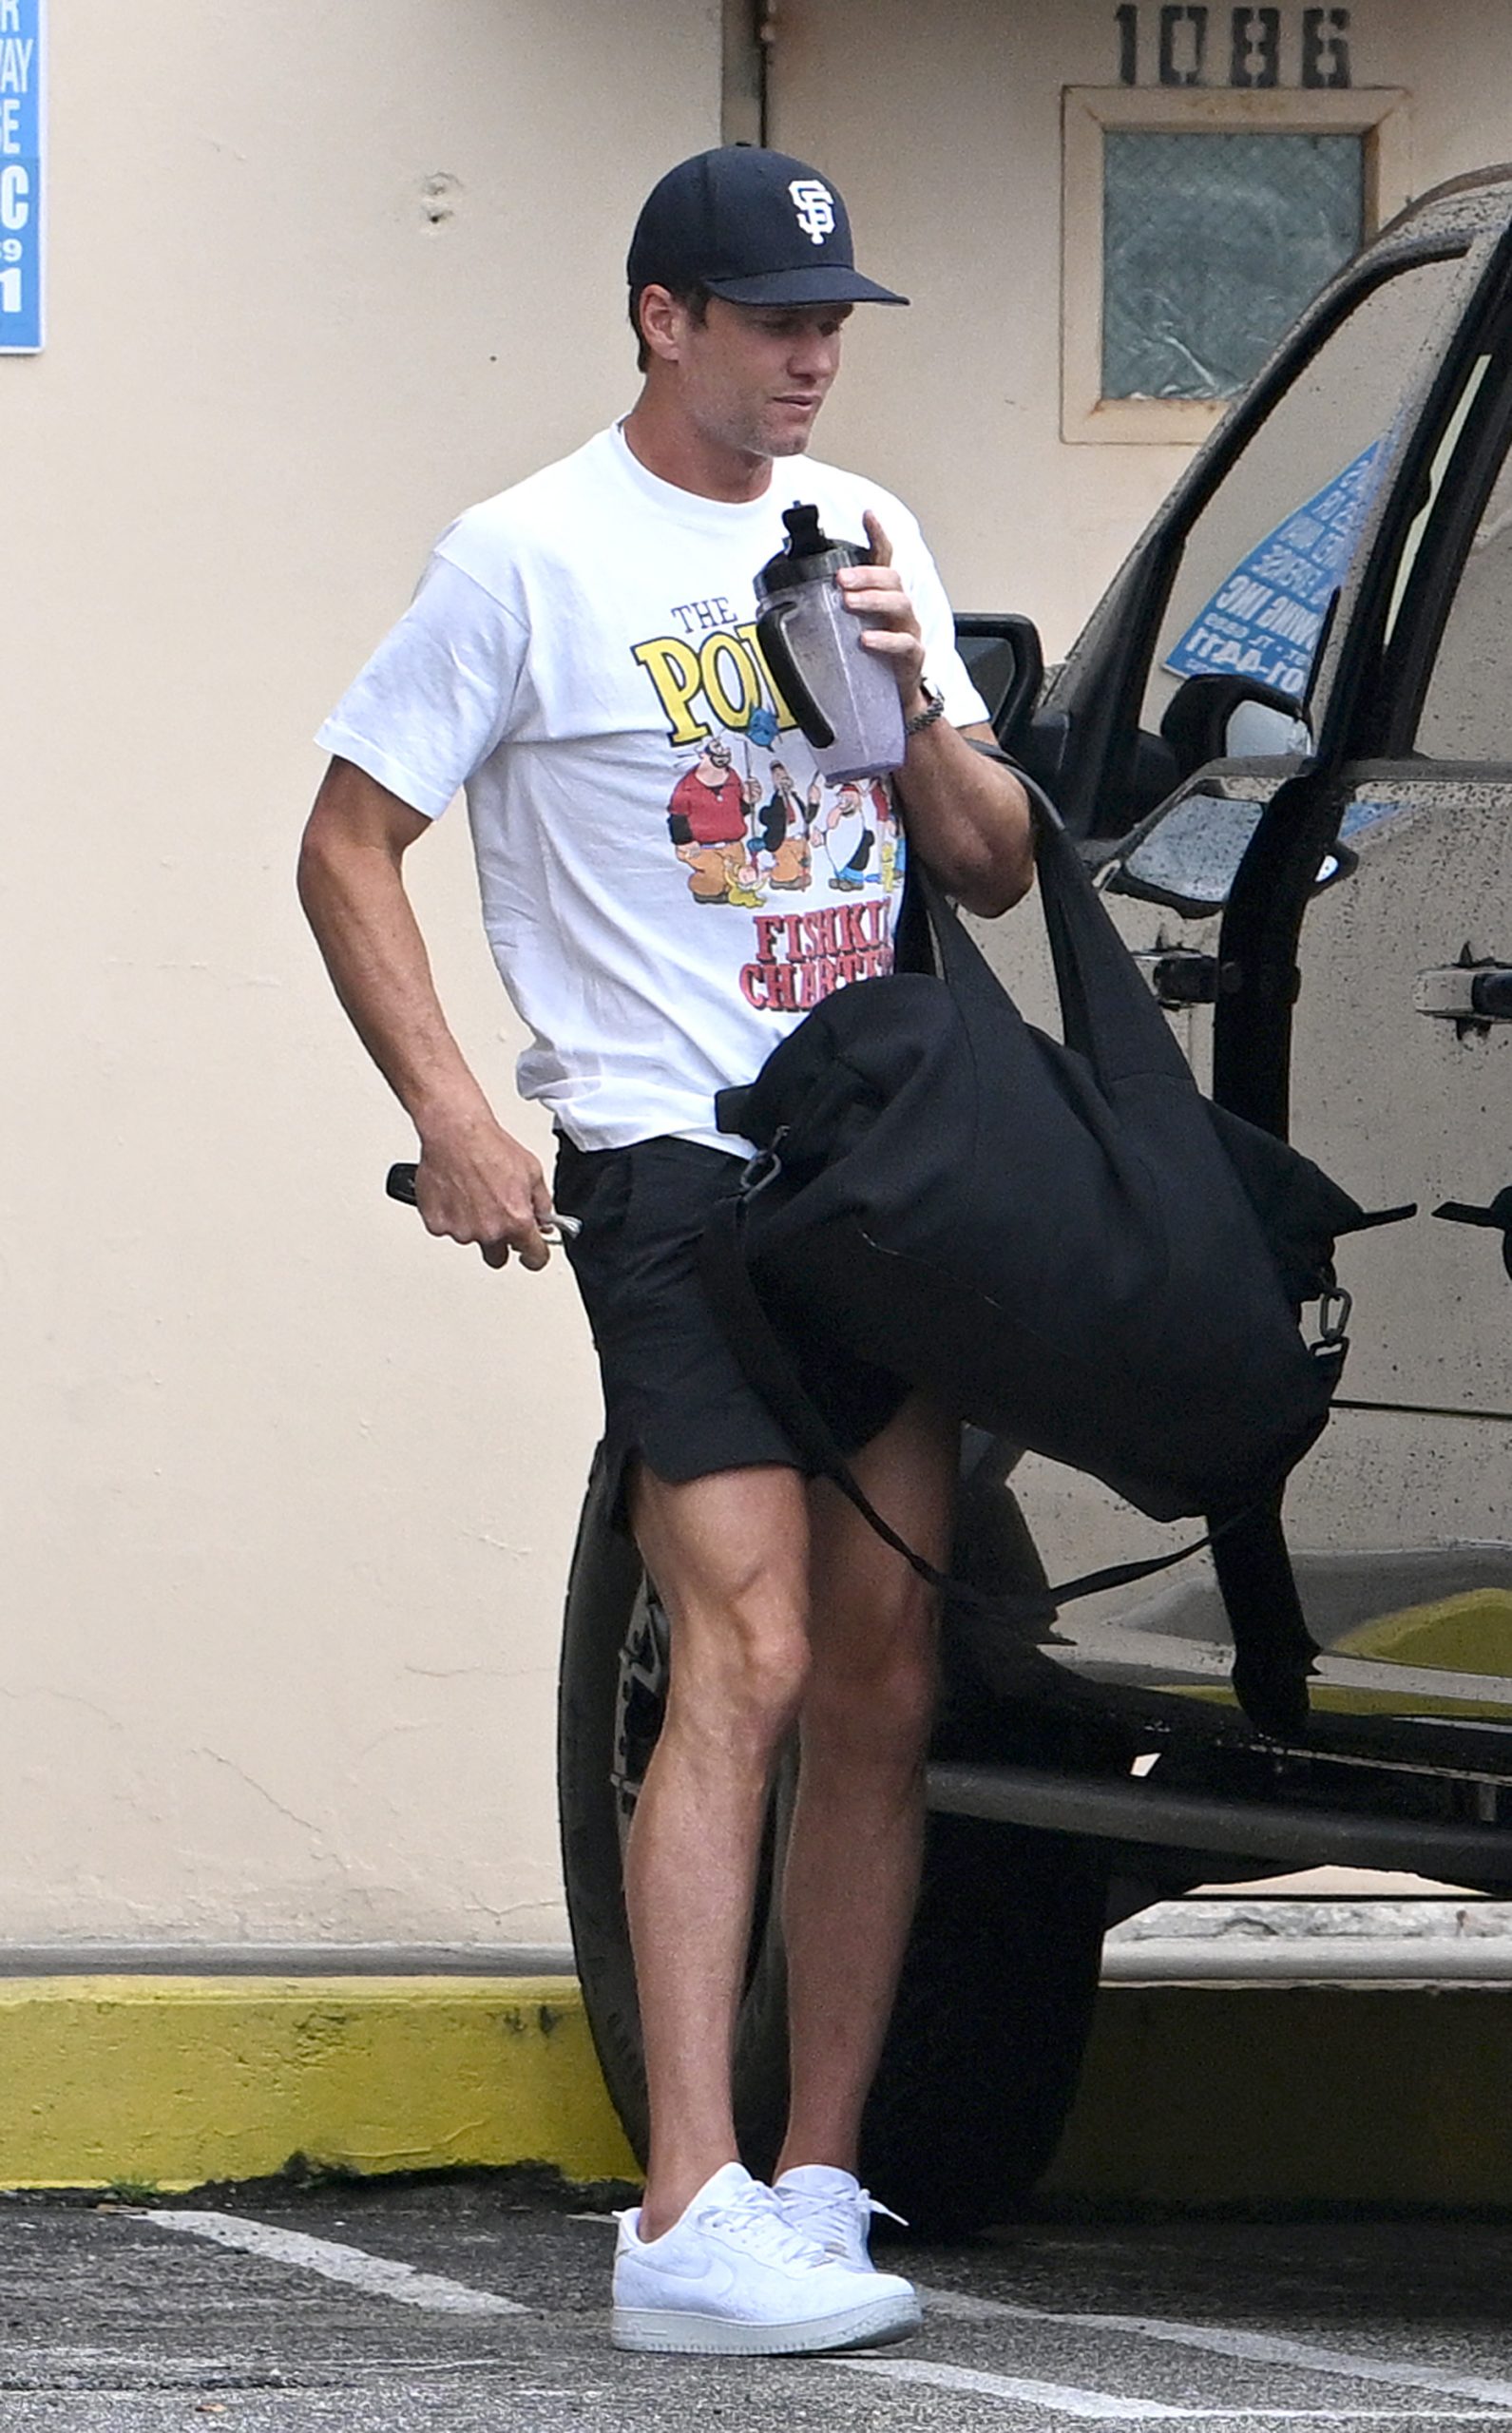 Brady was spotted in a Popeye themed-t-shirt and a San Francisco Giants baseball cap